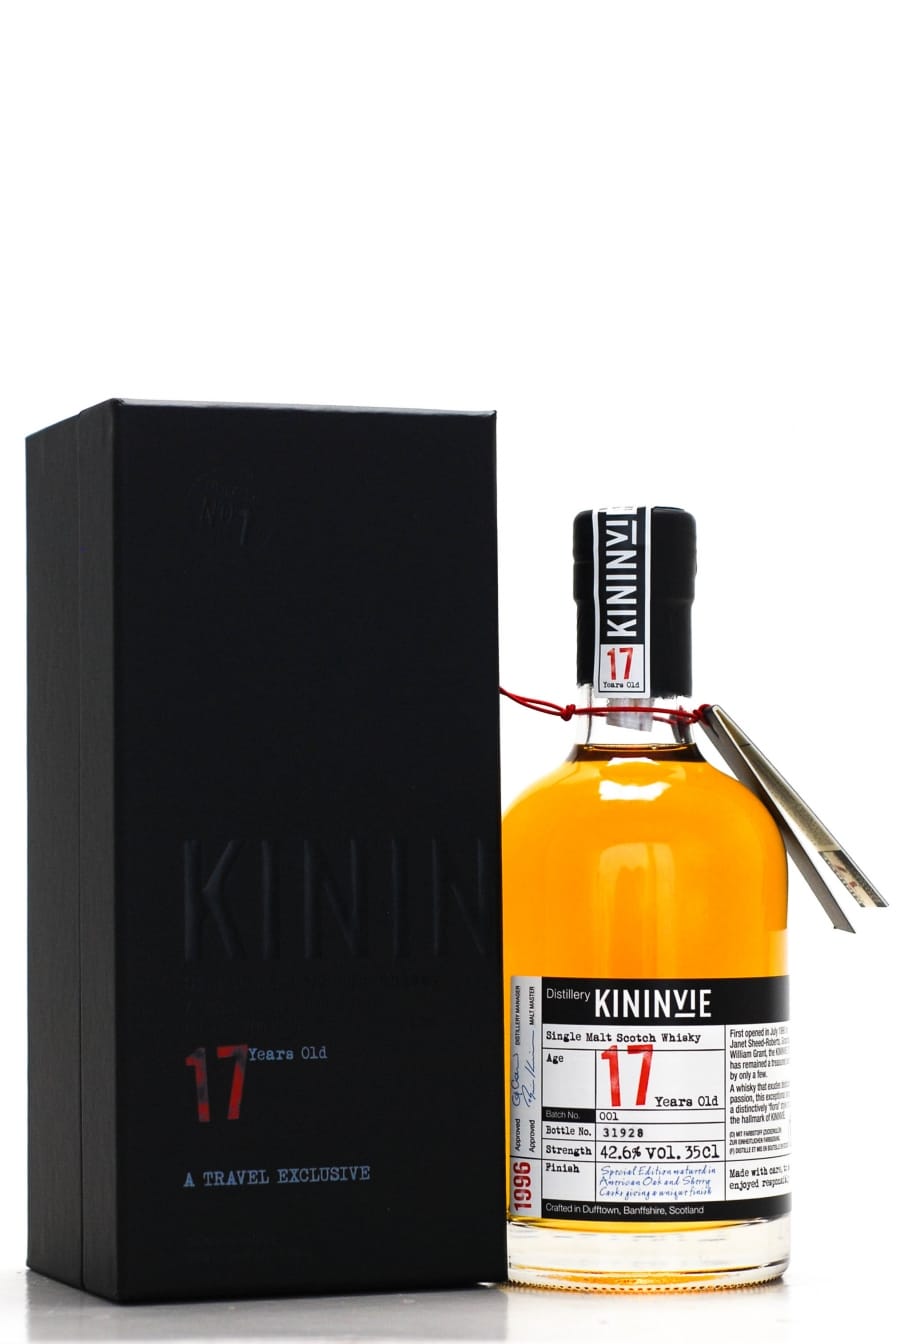 Kininvie - 17 Years Old Batch 001 Travel Retail 42.6% 1996 In Original Container